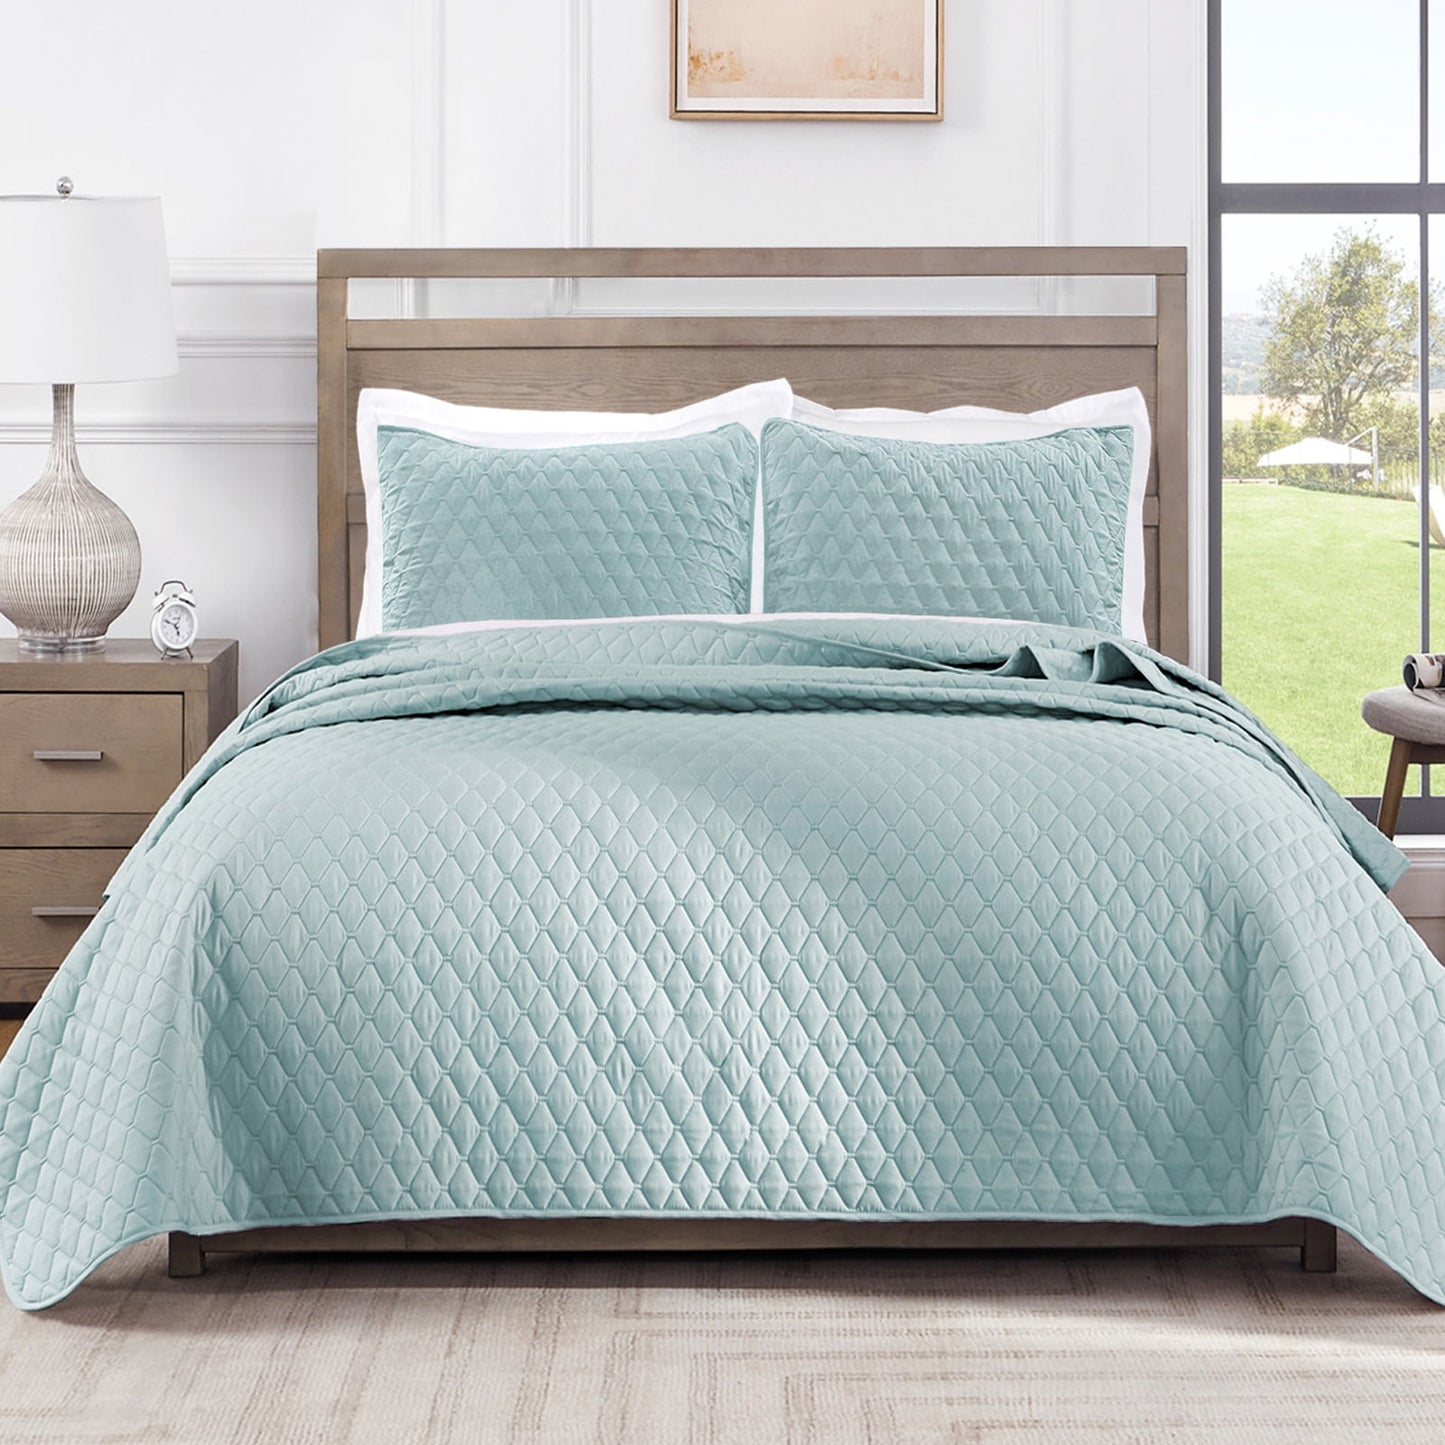 Exclusivo Mezcla Ultrasonic Reversible Twin Quilt Bedding Set with Pillow Sham, Lightweight Quilts Twin Size, Soft Bedspreads Bed Coverlets for All Seasons - (Aqua Blue, 68"x88")